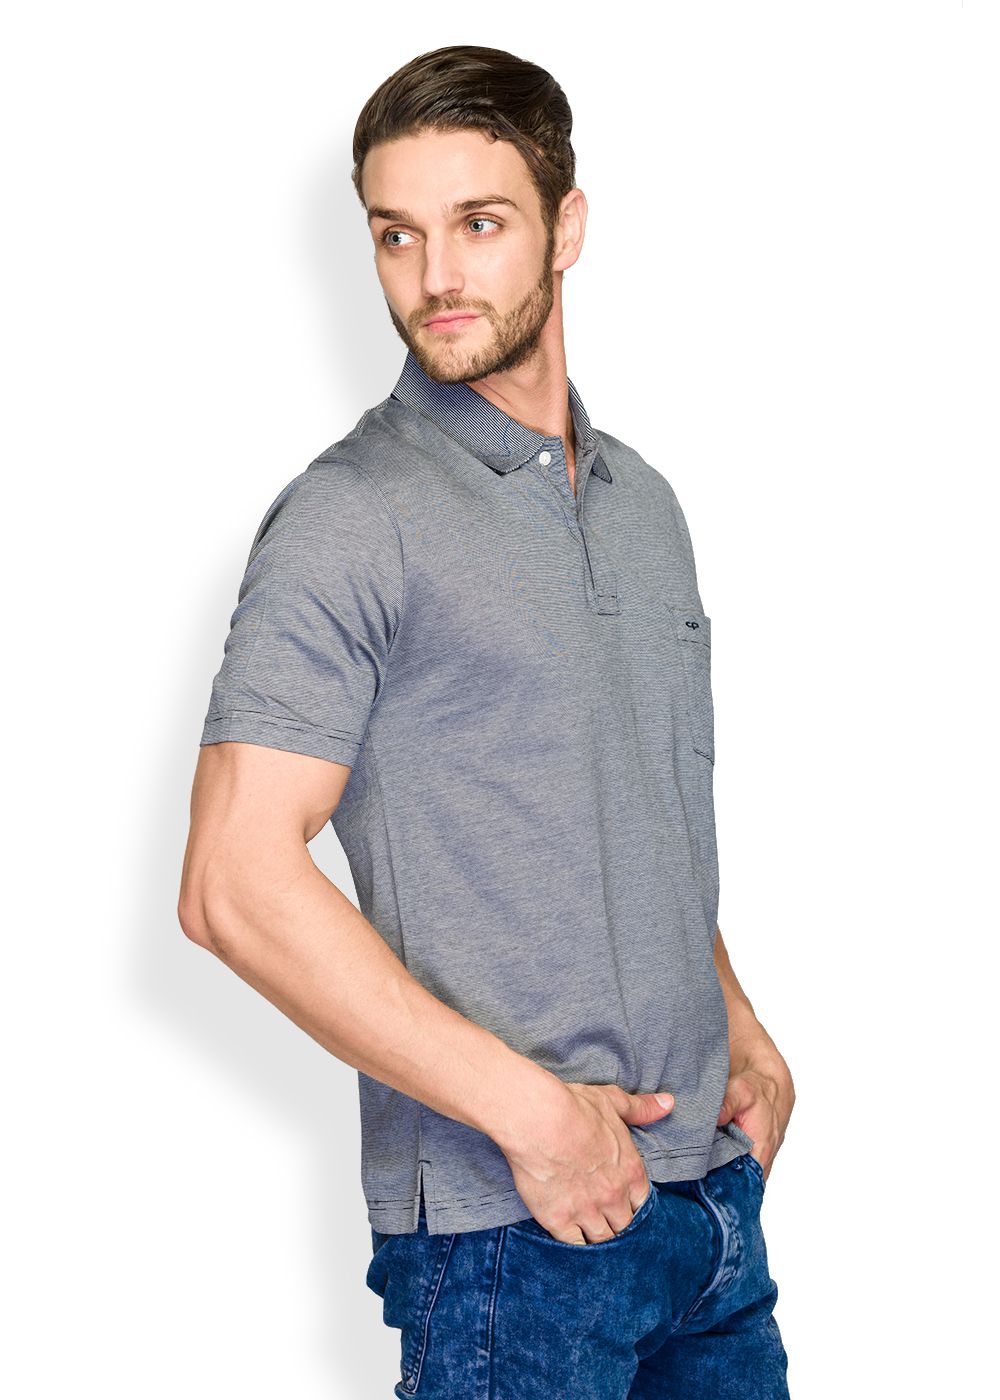 ColorPlus Grey Polo T Shirts - Buy ColorPlus Grey Polo T Shirts Online ...